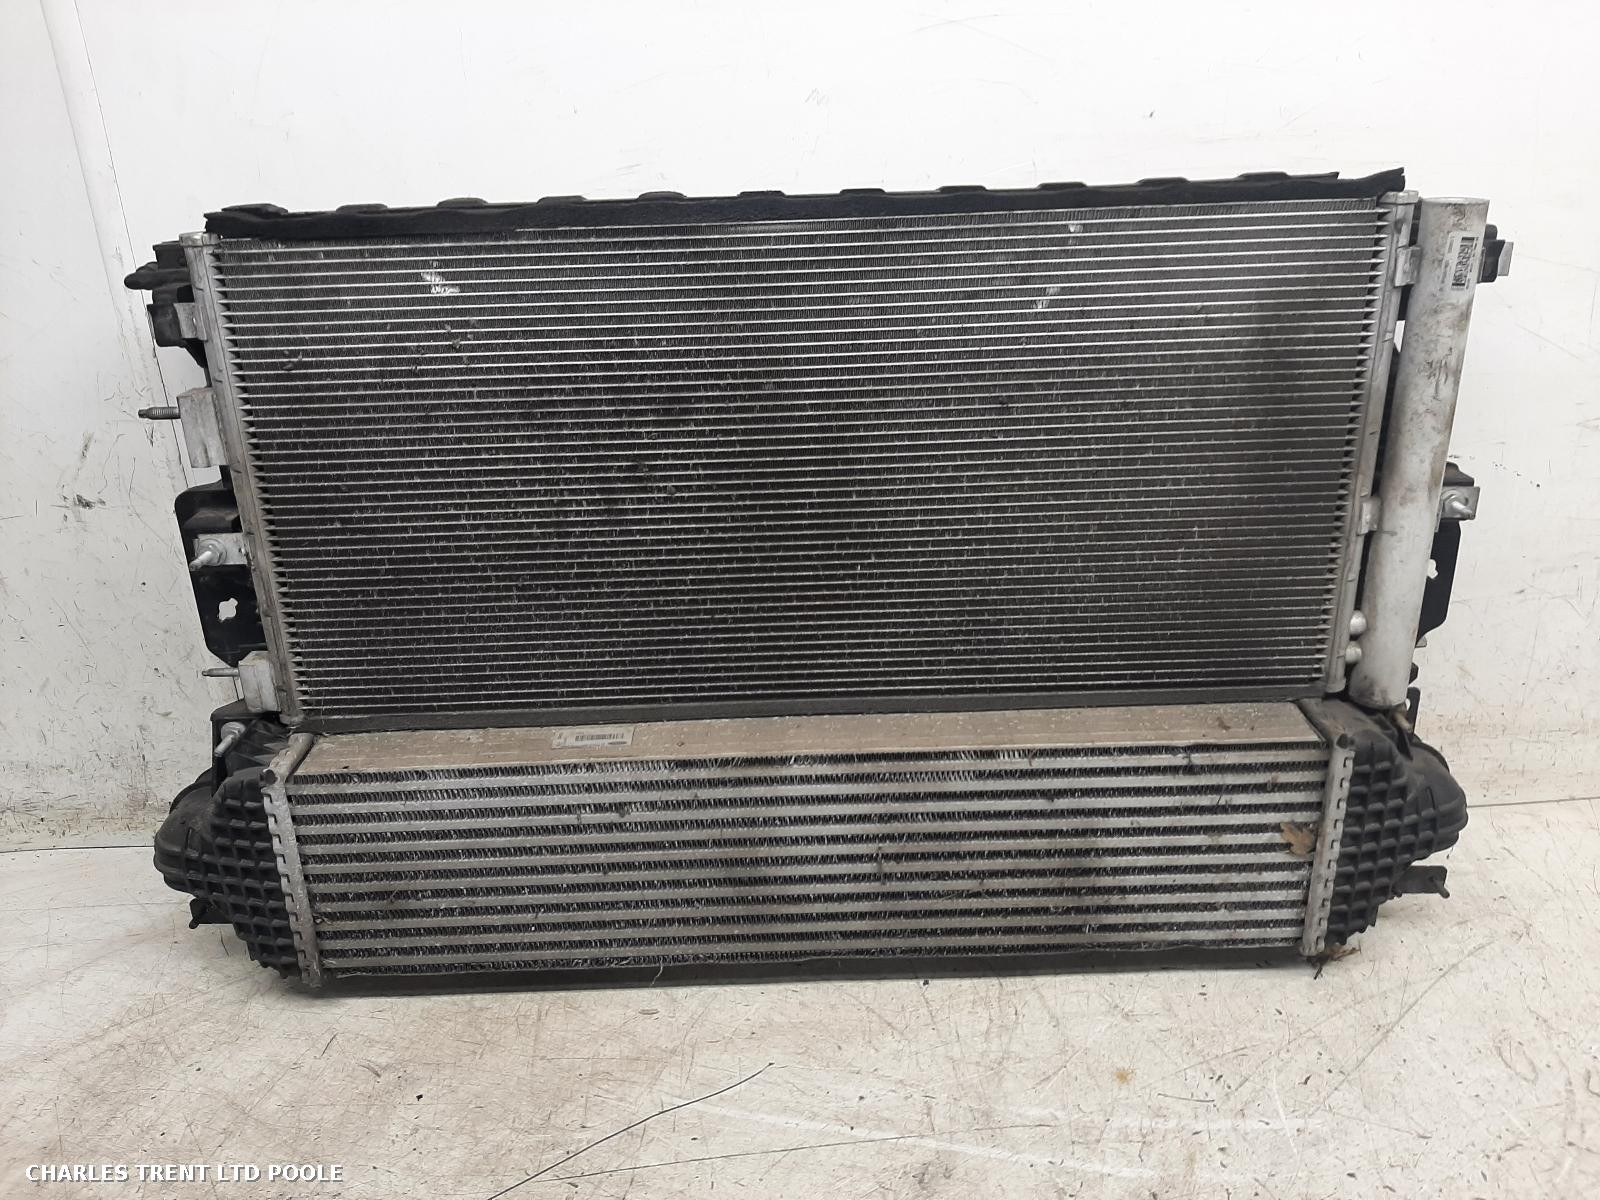 2016 - FORD - S MAX - RADIATOR PACK